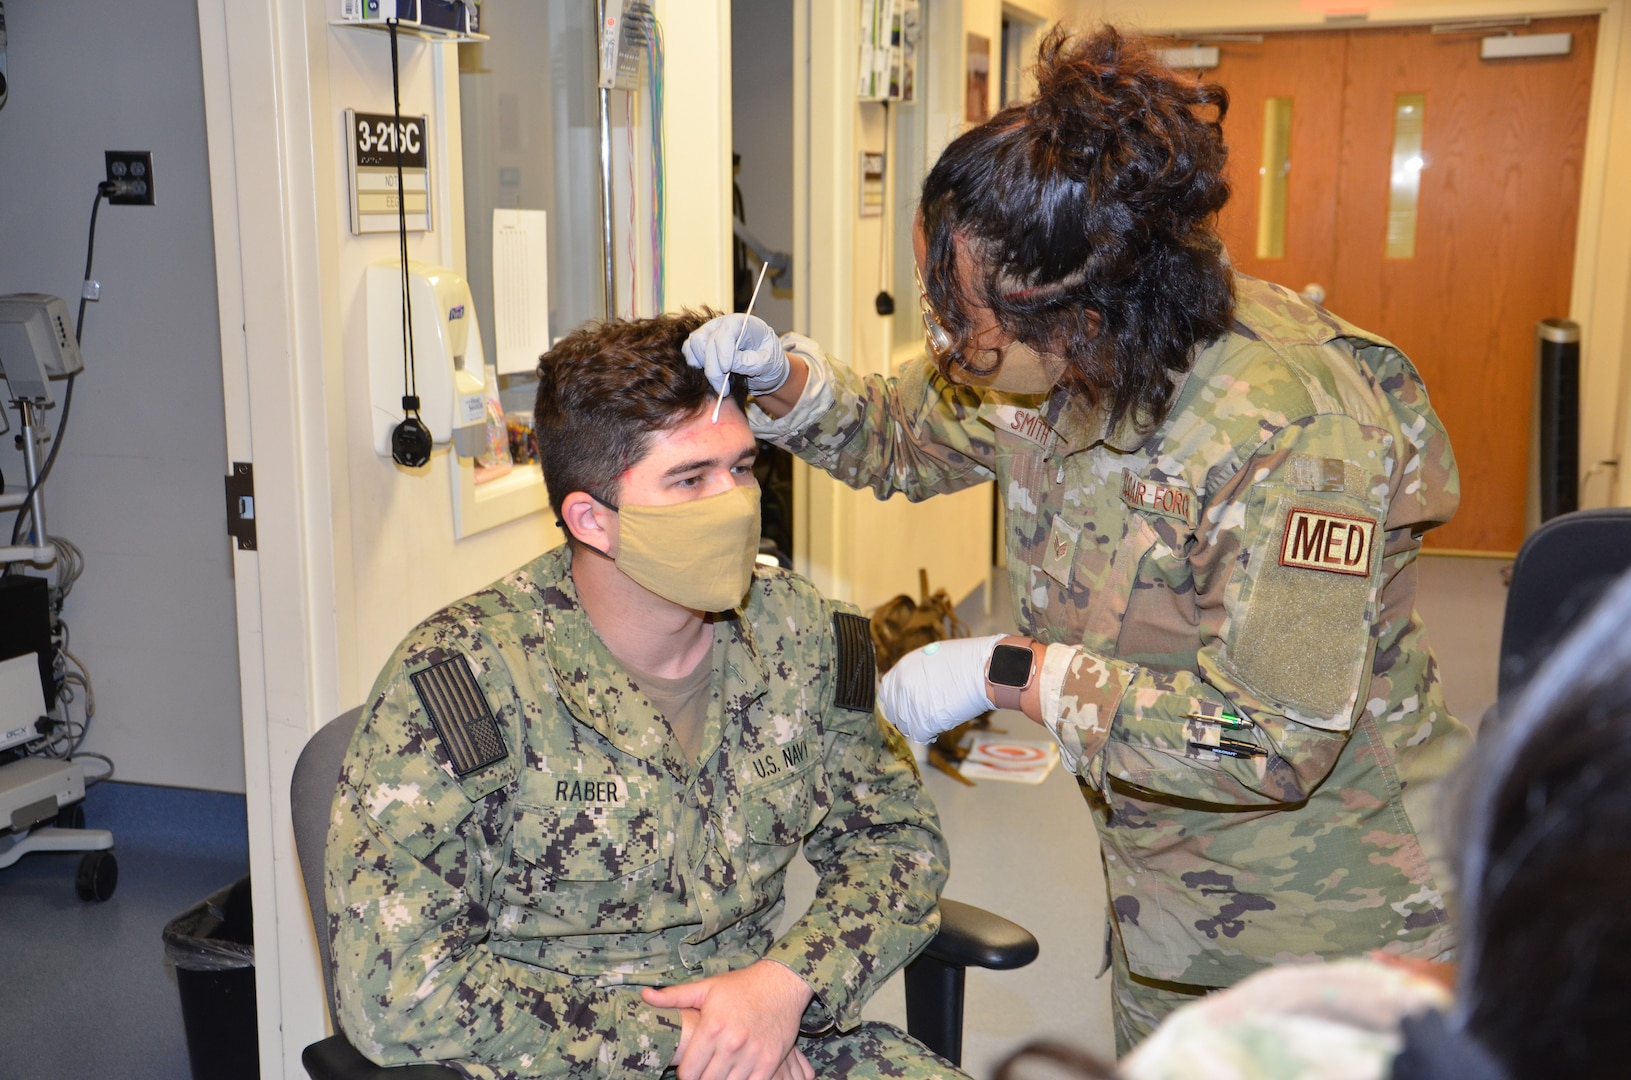 Air Force Senior Airman Christine Smith,  a student in the Neurodiagnostic Technician program at the Medical Education and Training Campus, practices the electrode application method required for performance of the Electroencephalogram (EEG) on fellow student, Navy Seaman Larry Raber.